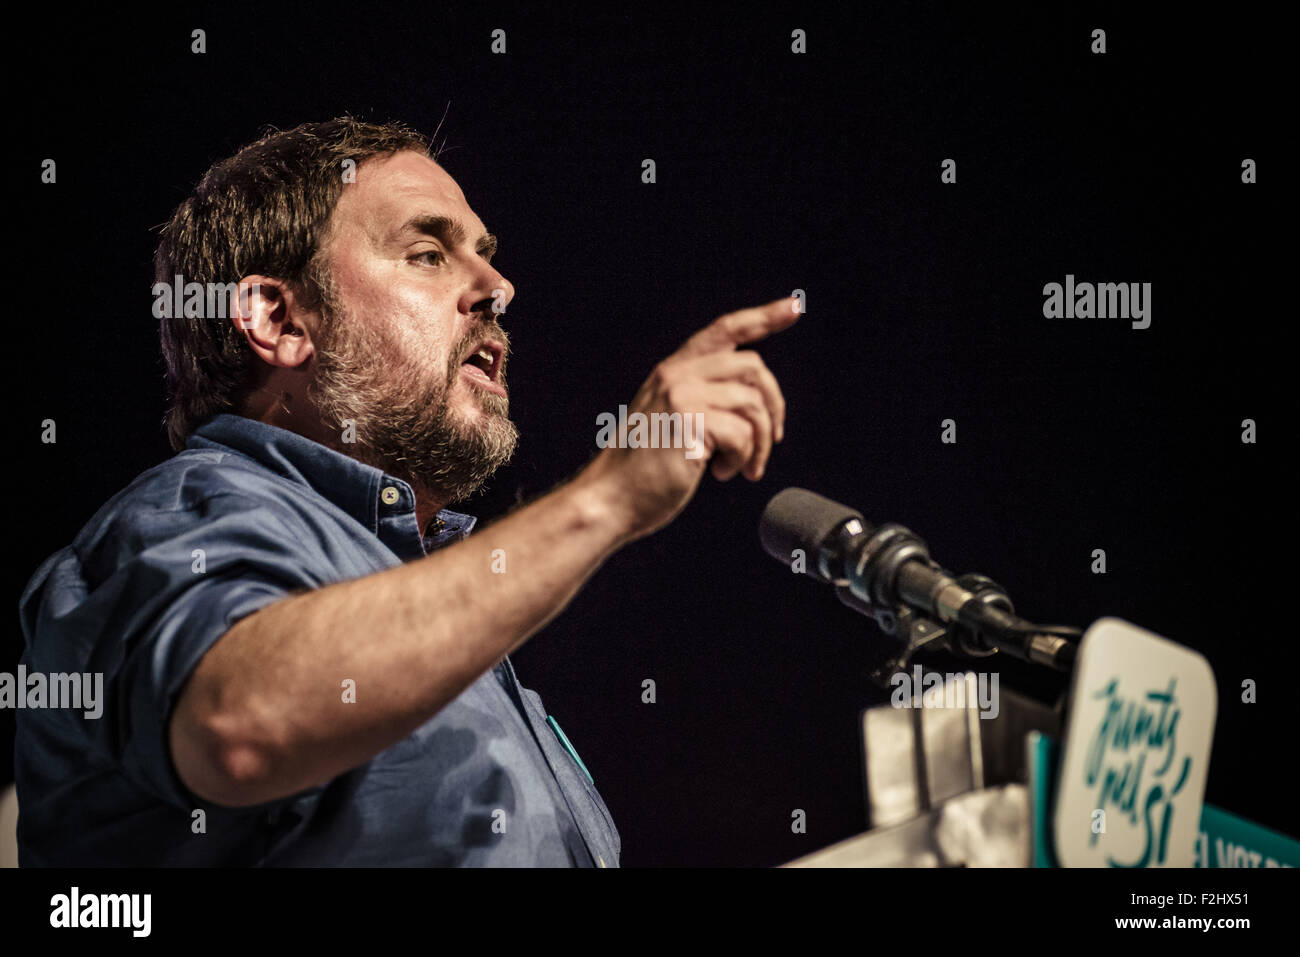 L'Hospitalet De Llobregat, Catalonia, Spain. 19th September, 2015. ORIOL JUNQUERAS, president of the ERC party and number 5 of the pro-independence cross-party electoral list 'Junts pel Si' (Together for the yes) delivers a lively speech during the platforms central campaign act in L'Hospitalet de Llobregat. Credit:  Matthias Oesterle/ZUMA Wire/Alamy Live News Stock Photo